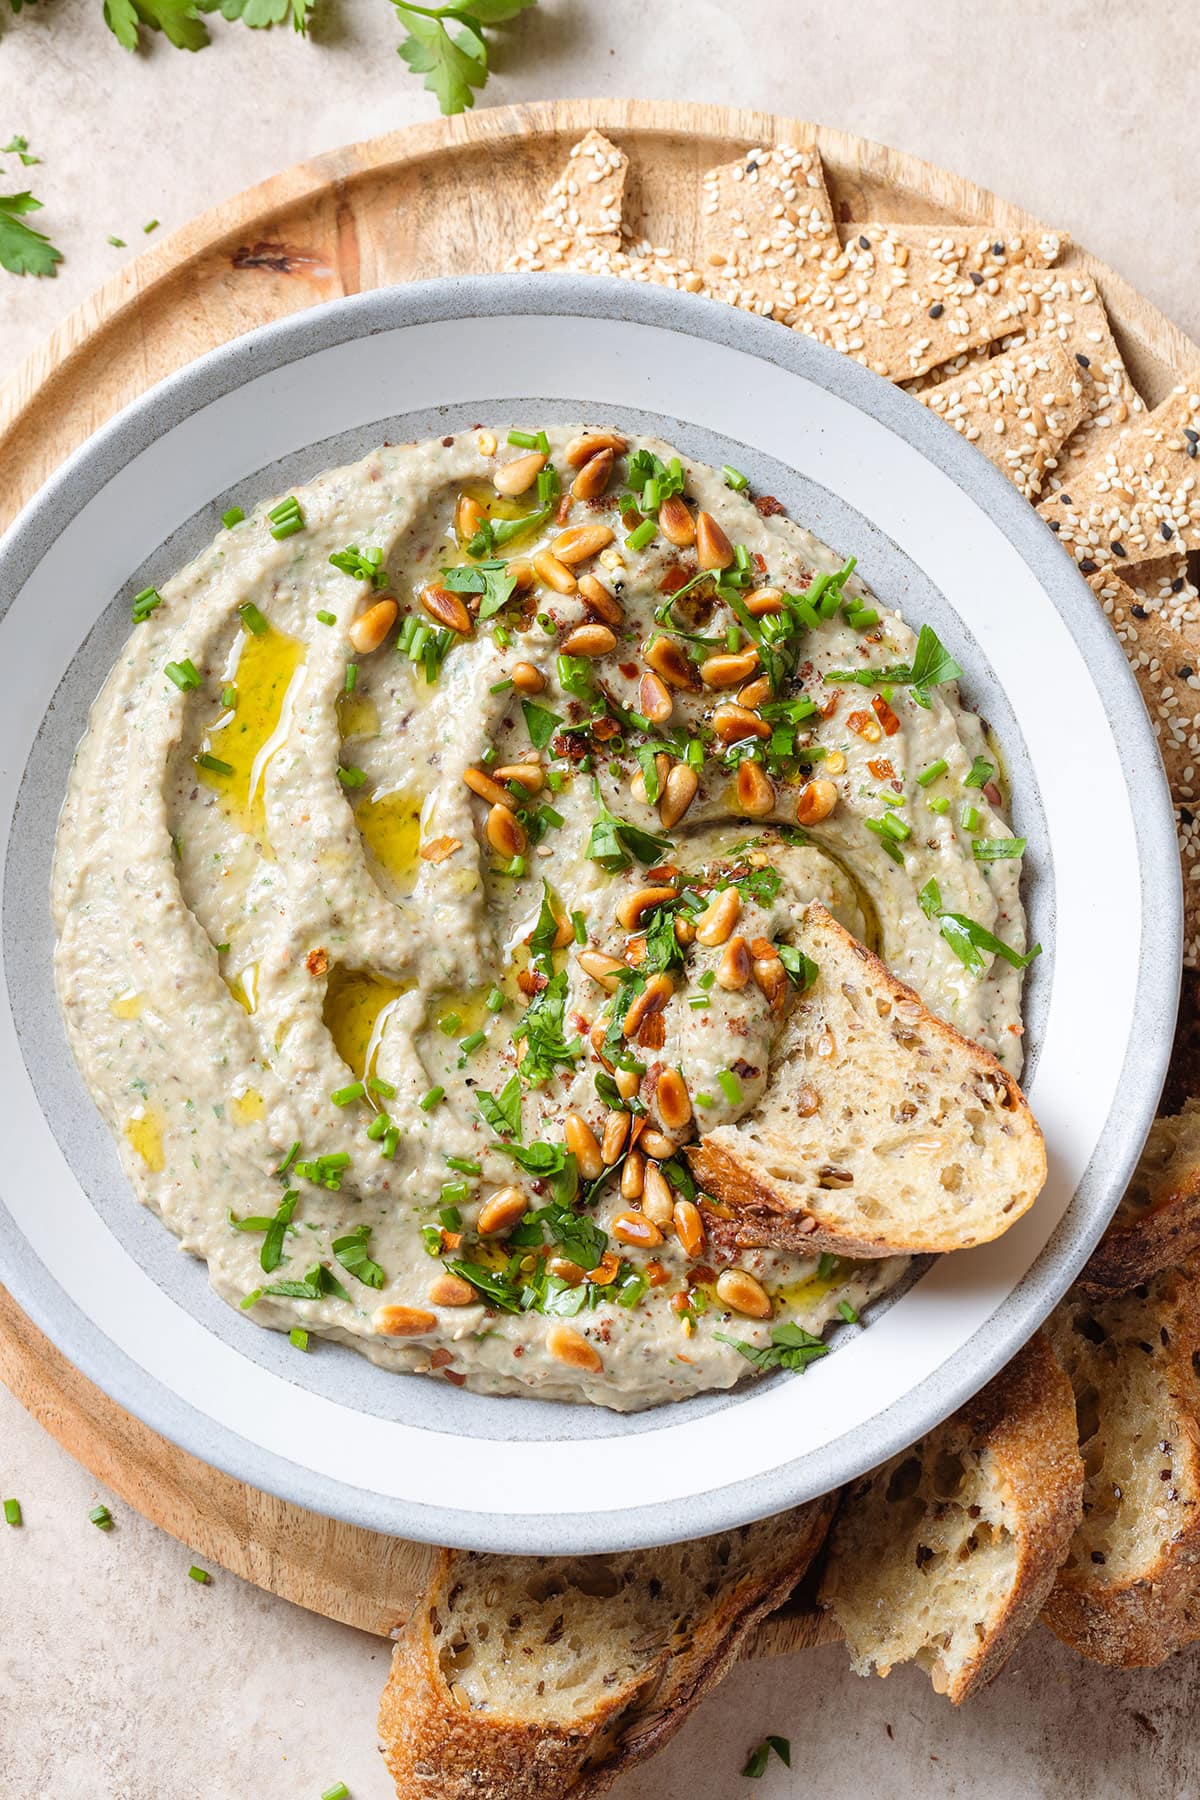 Creamy eggplant dip in a grey low bowl with a white edge, topped with toasted pine nuts and fresh herbs, with a slice of a toasted baguette dipped into the dip.